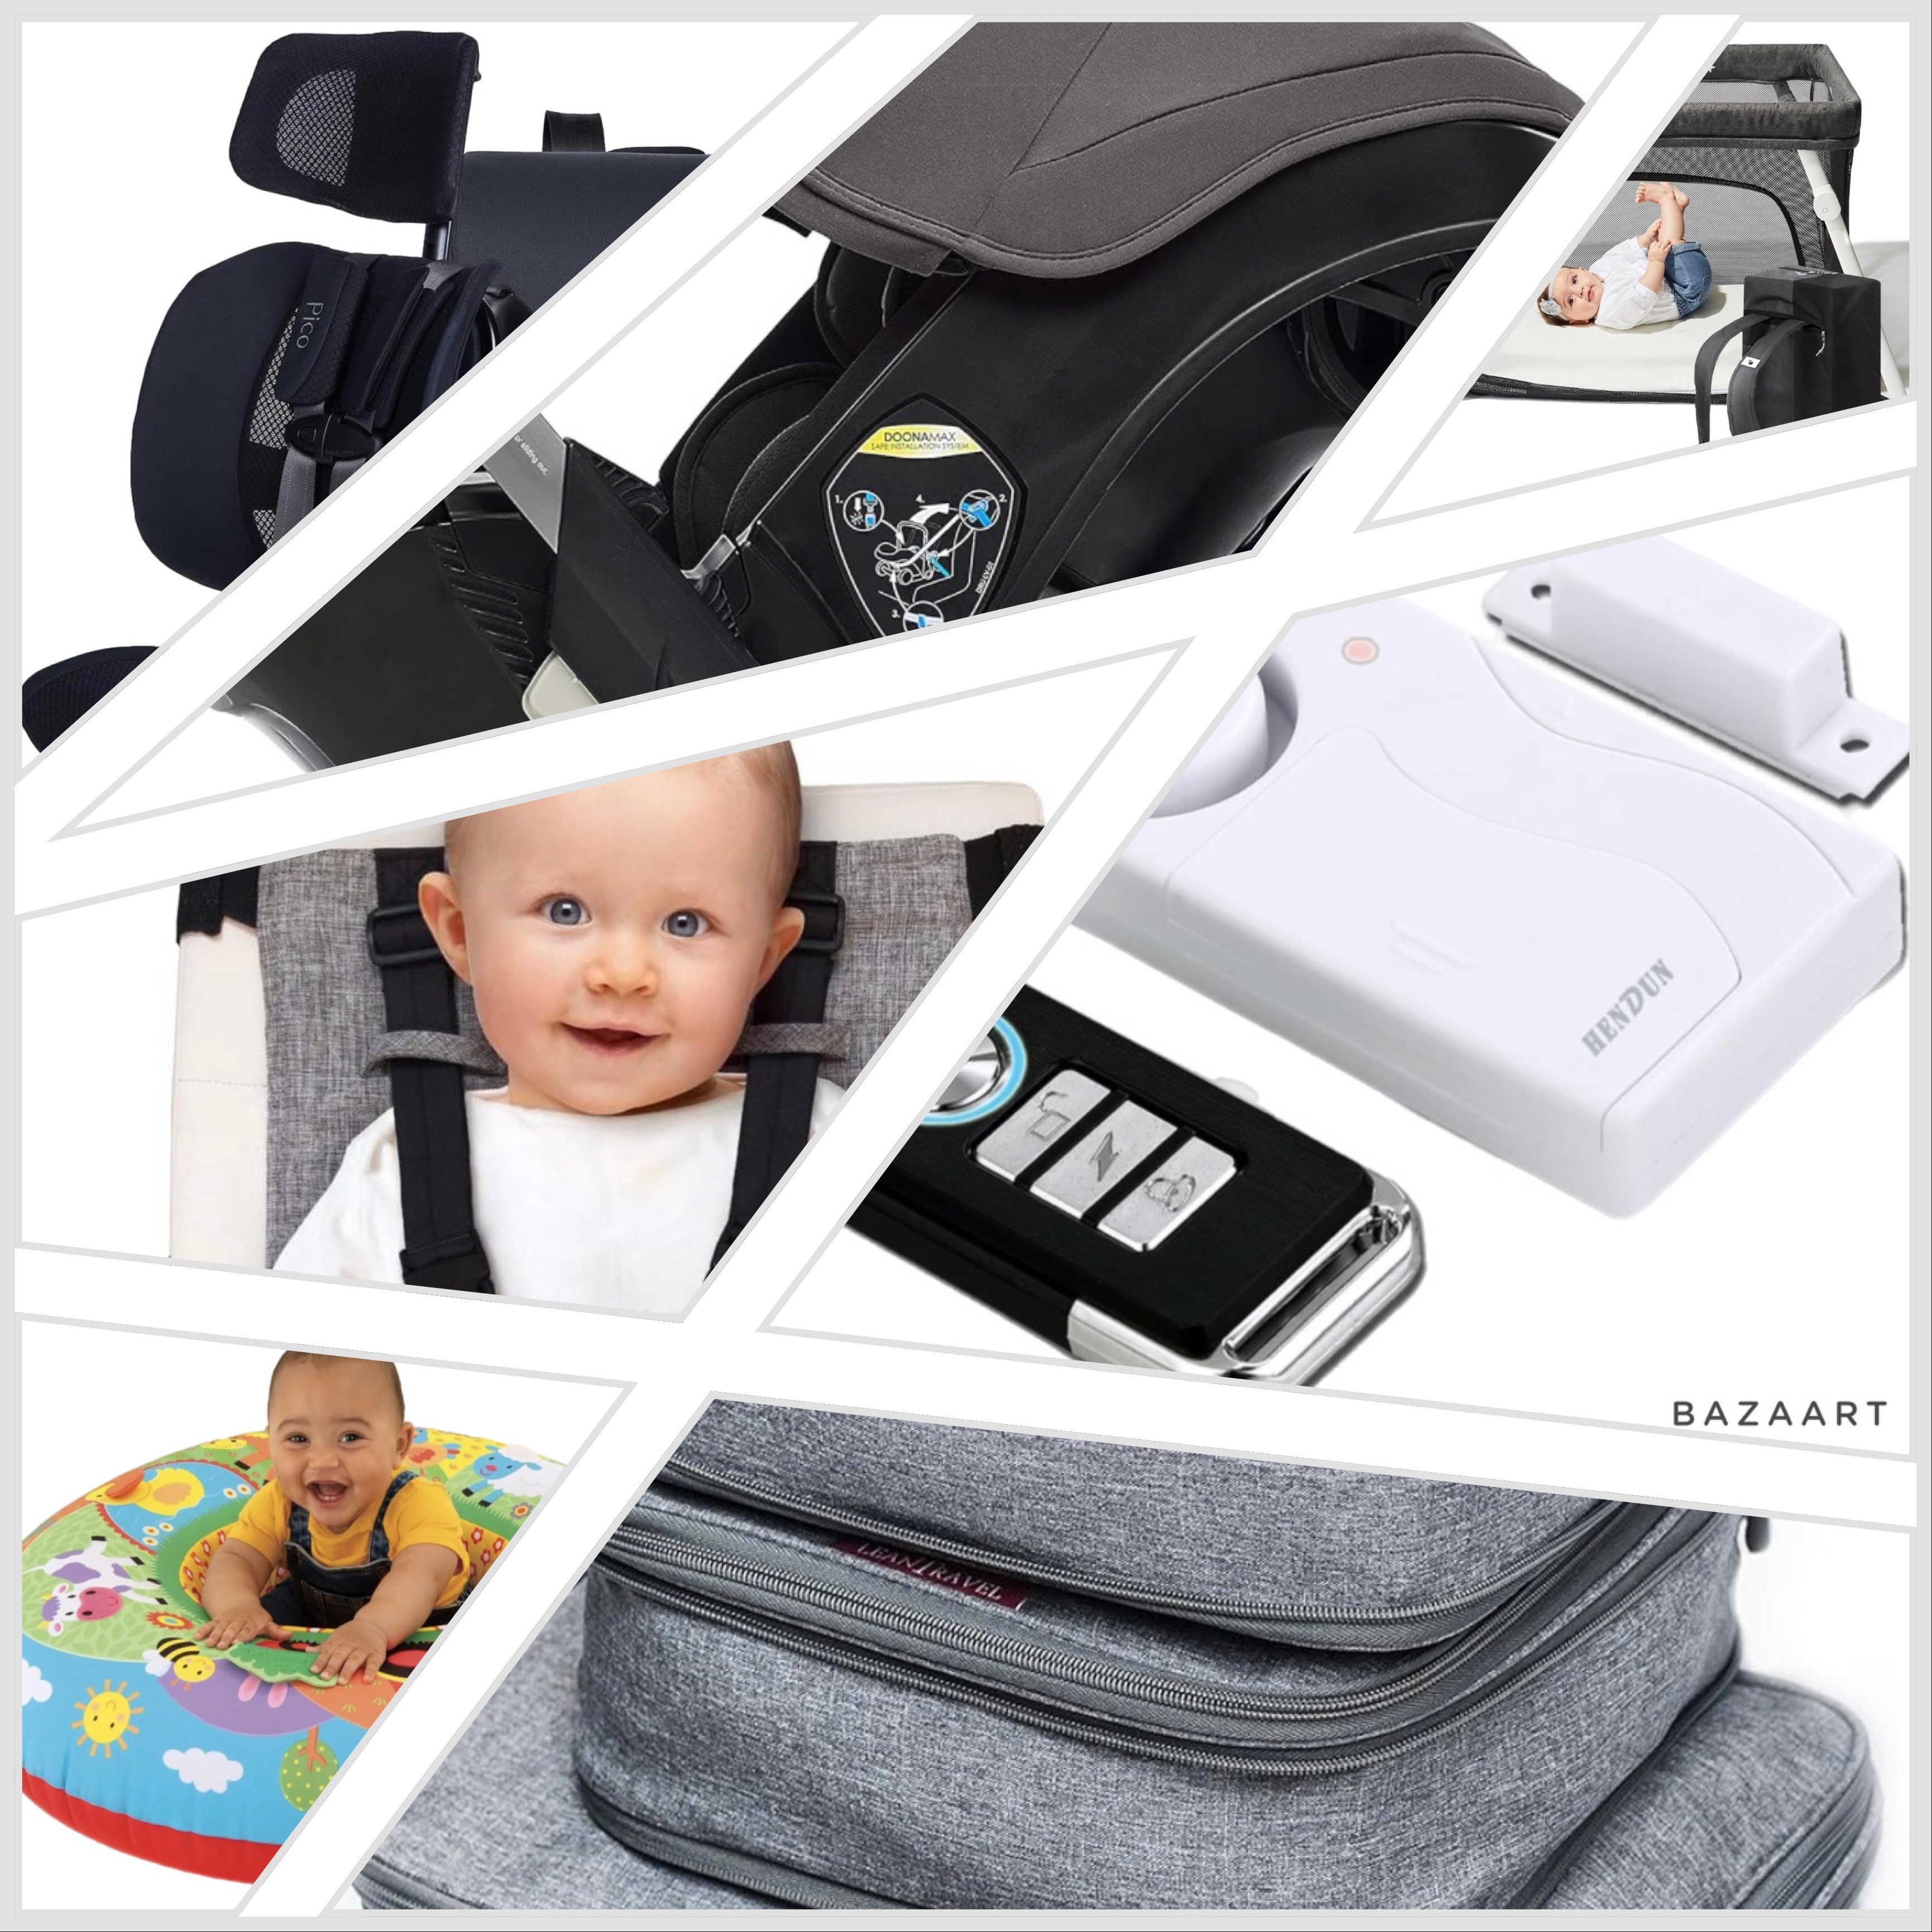 Amazon Travel with Kids Best Buys for Parents